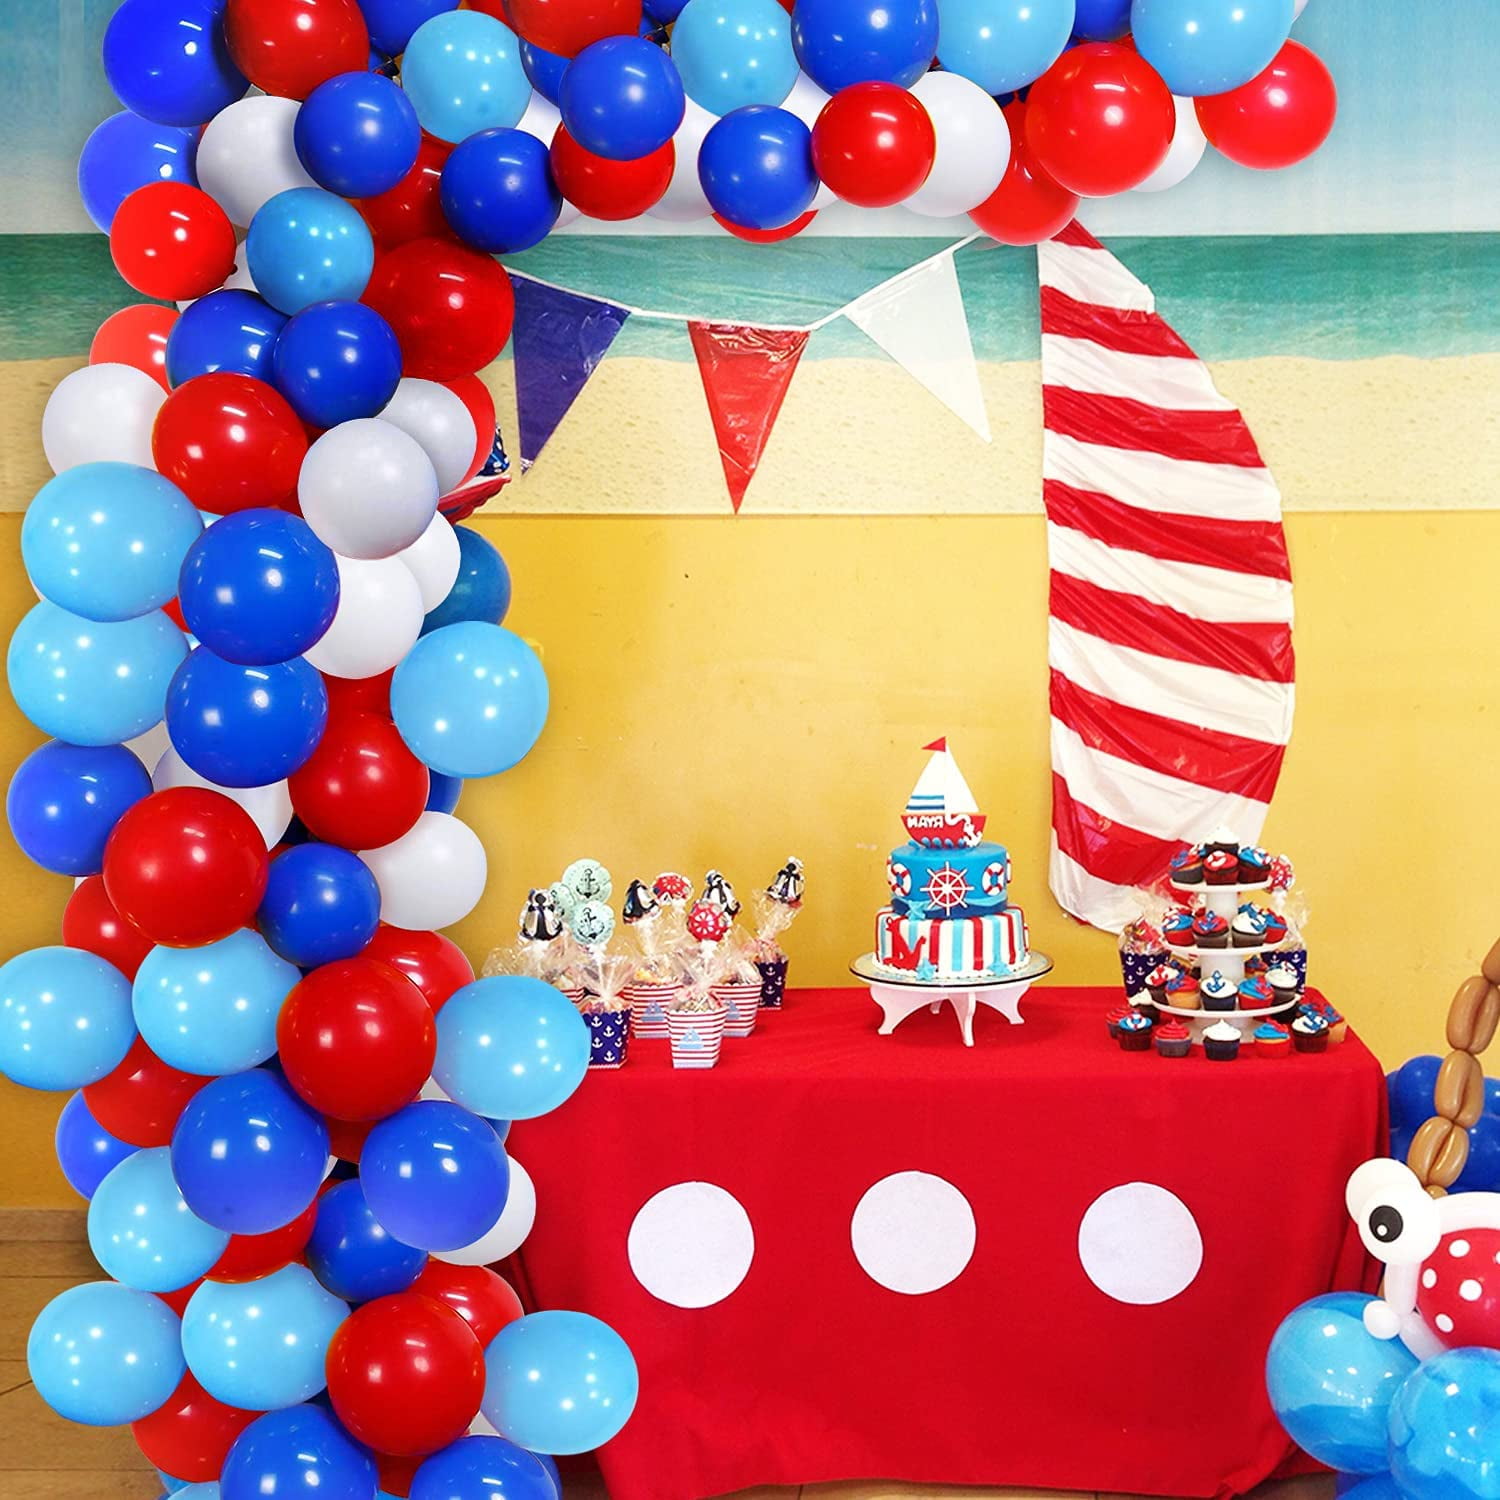 AOWEE Red White and Blue Balloon Garland Arch Kit, Royal Light Blue Red  White Latex Balloons Patriotic 4th of July Balloon Arch for Boys Men  Baseball